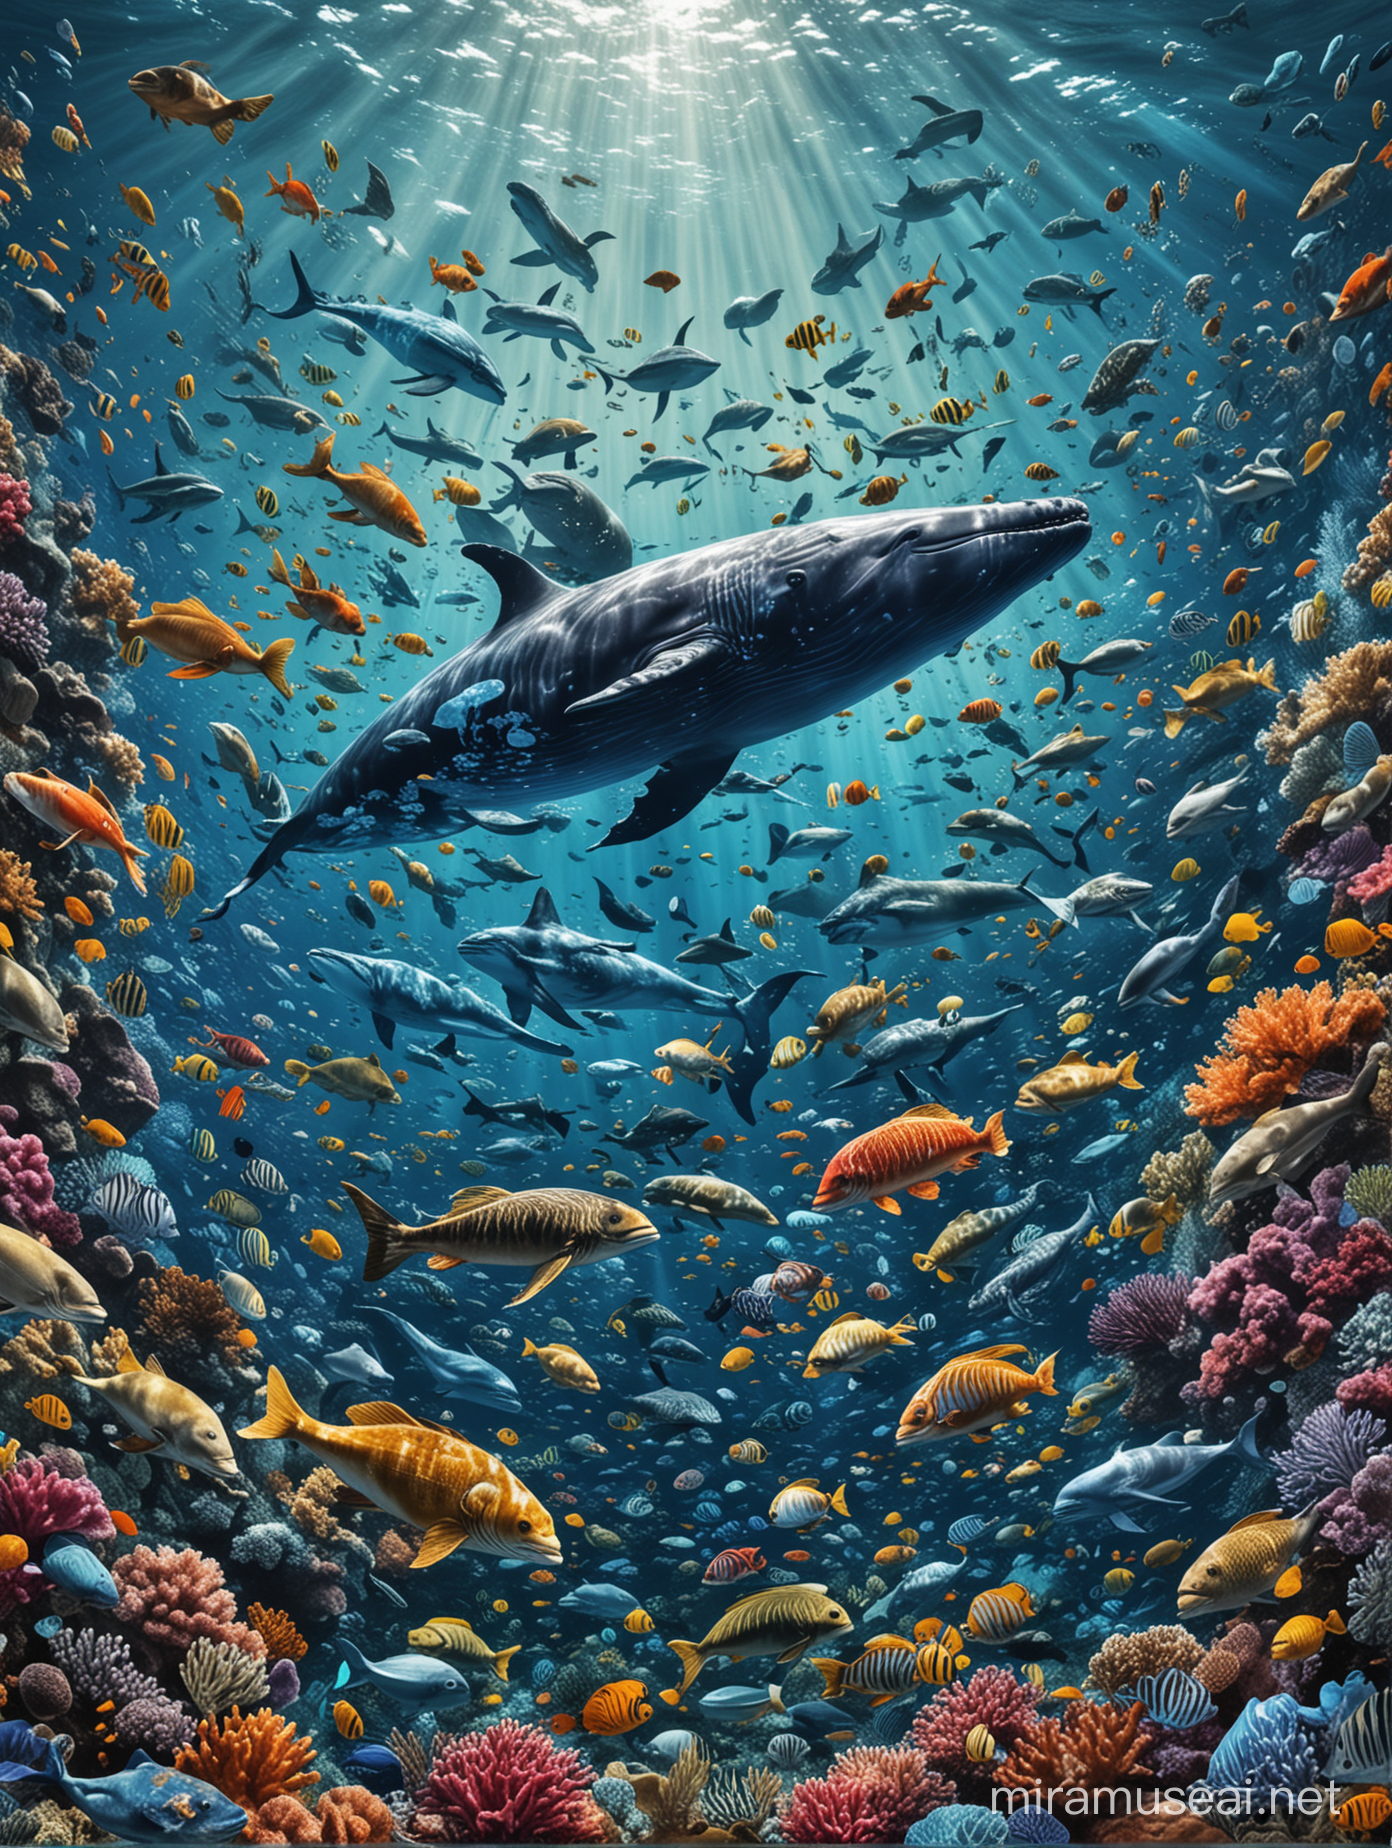 A dynamic collage showcasing the diverse marine life of the ocean, from colorful tropical fish to majestic whales, creating a mesmerizing visual feast for the eyes.